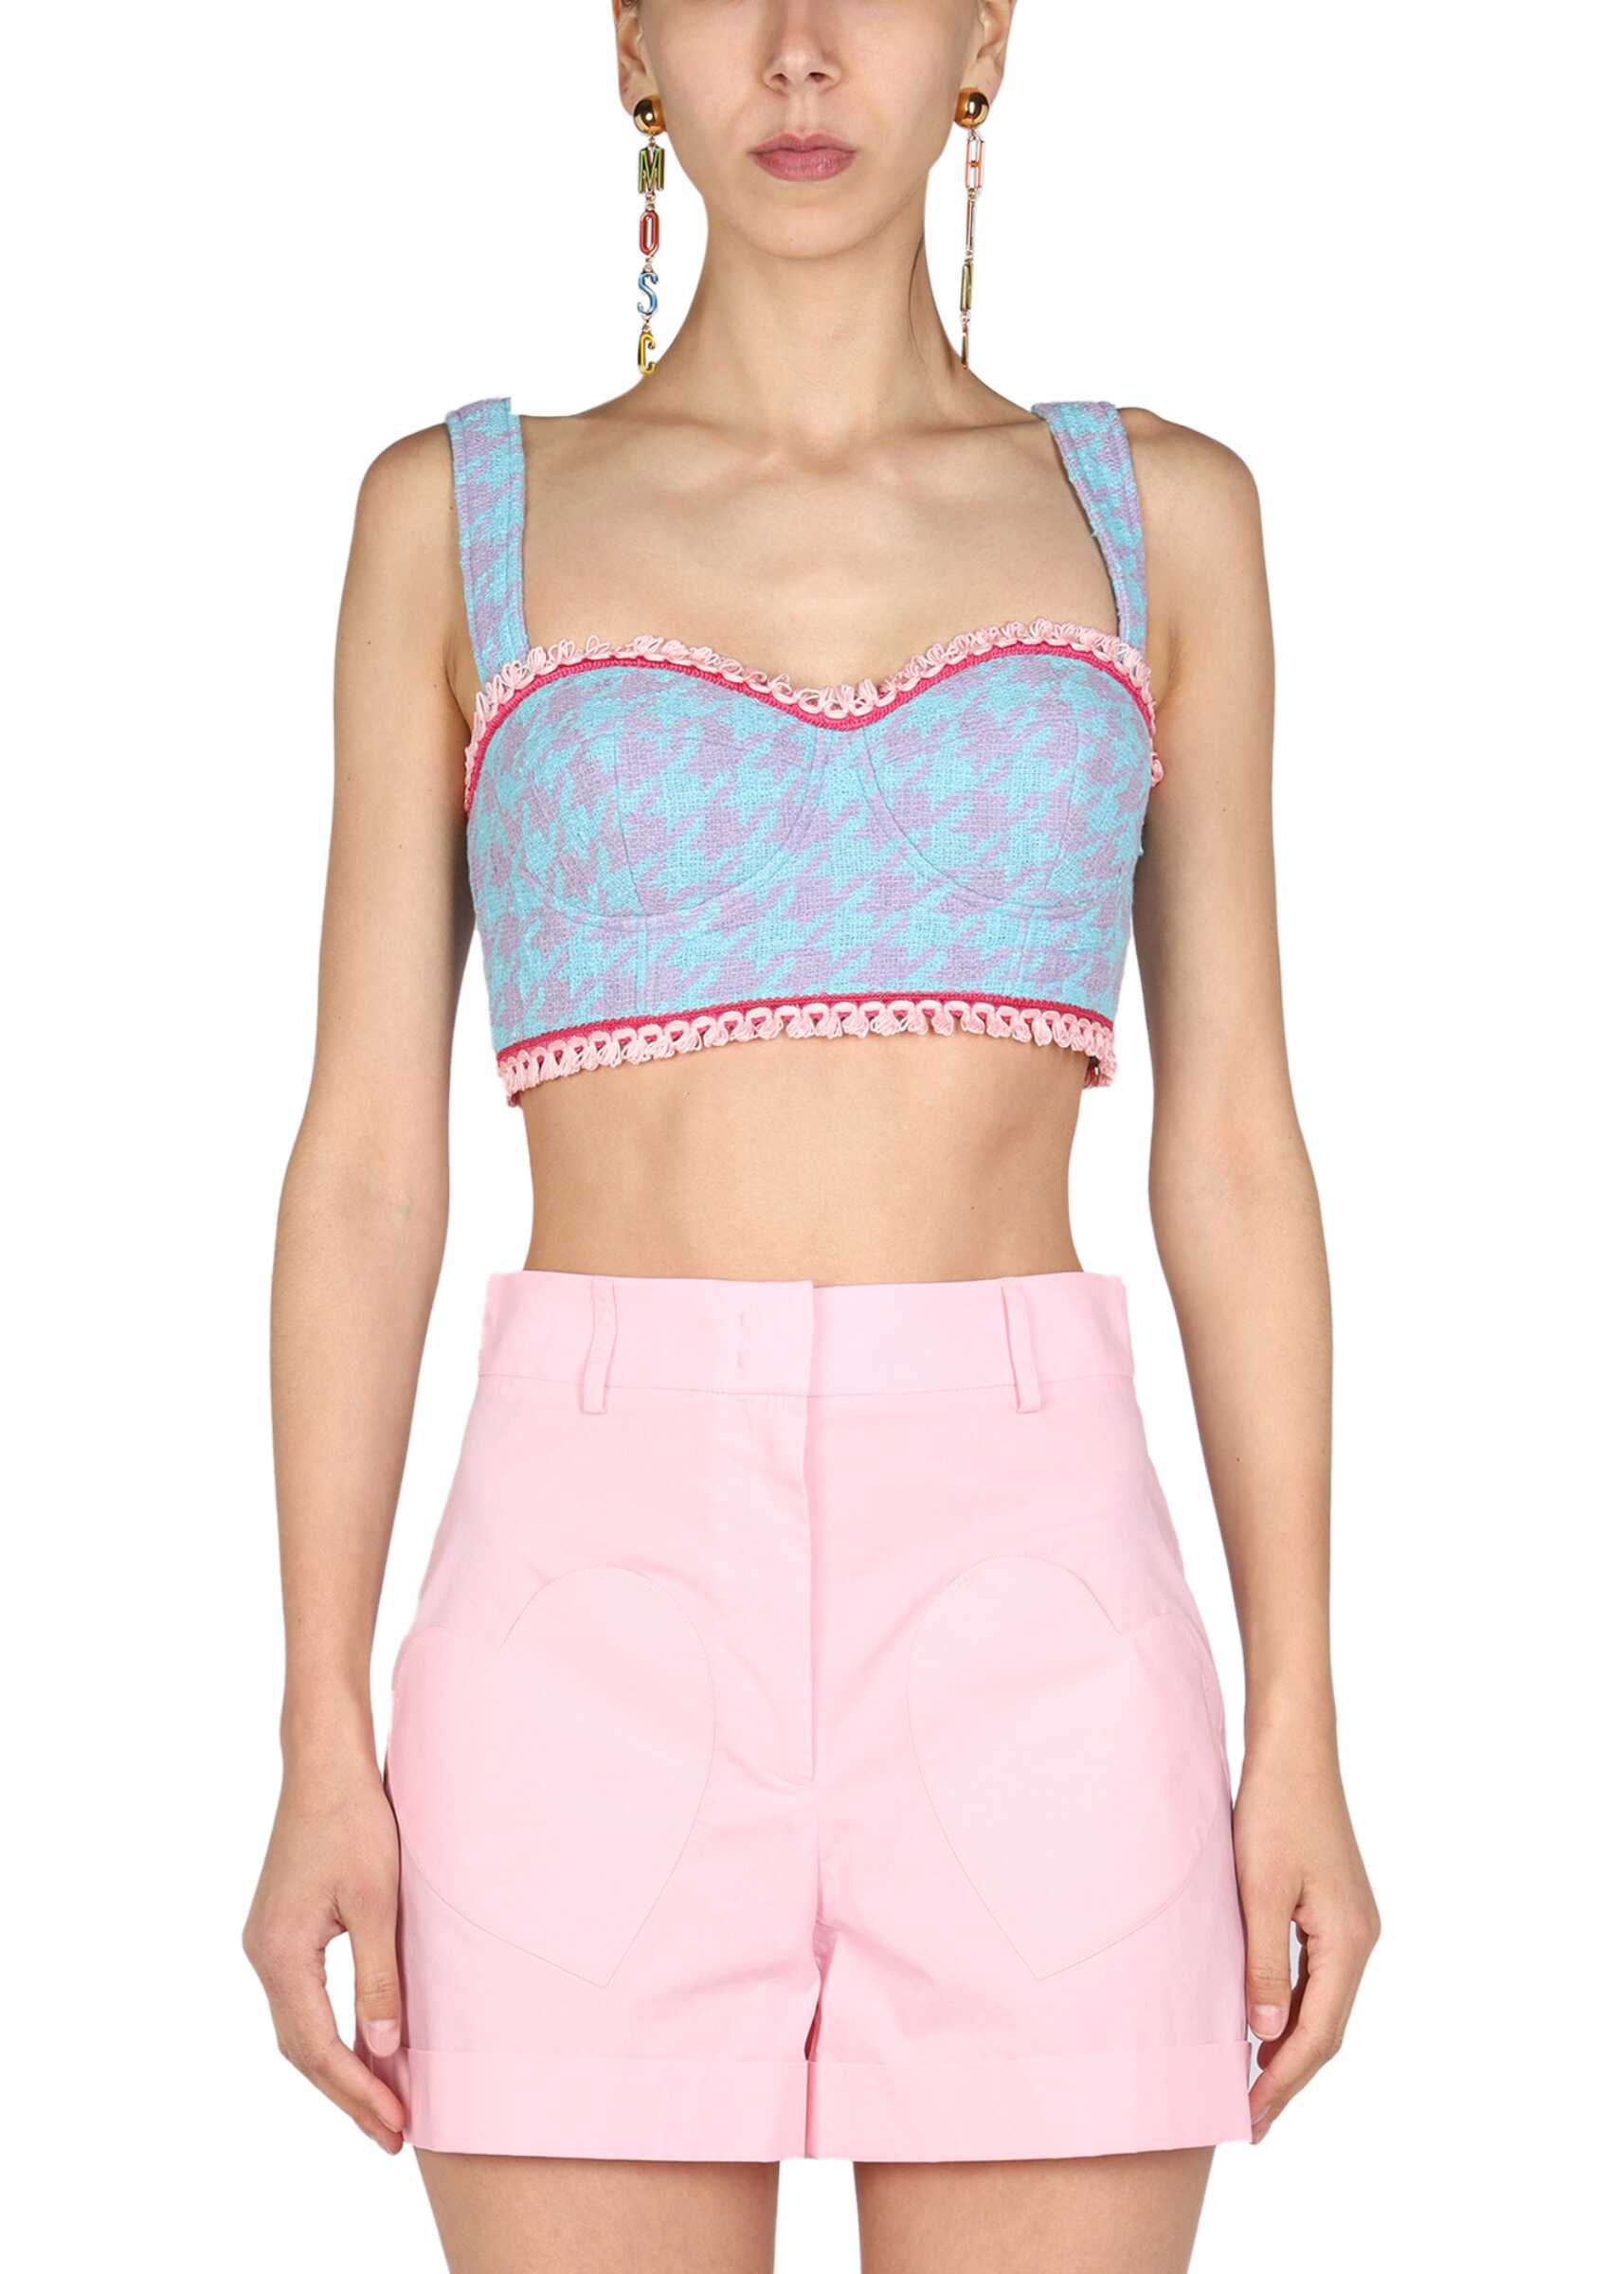 Moschino Top Cropped AZURE image0